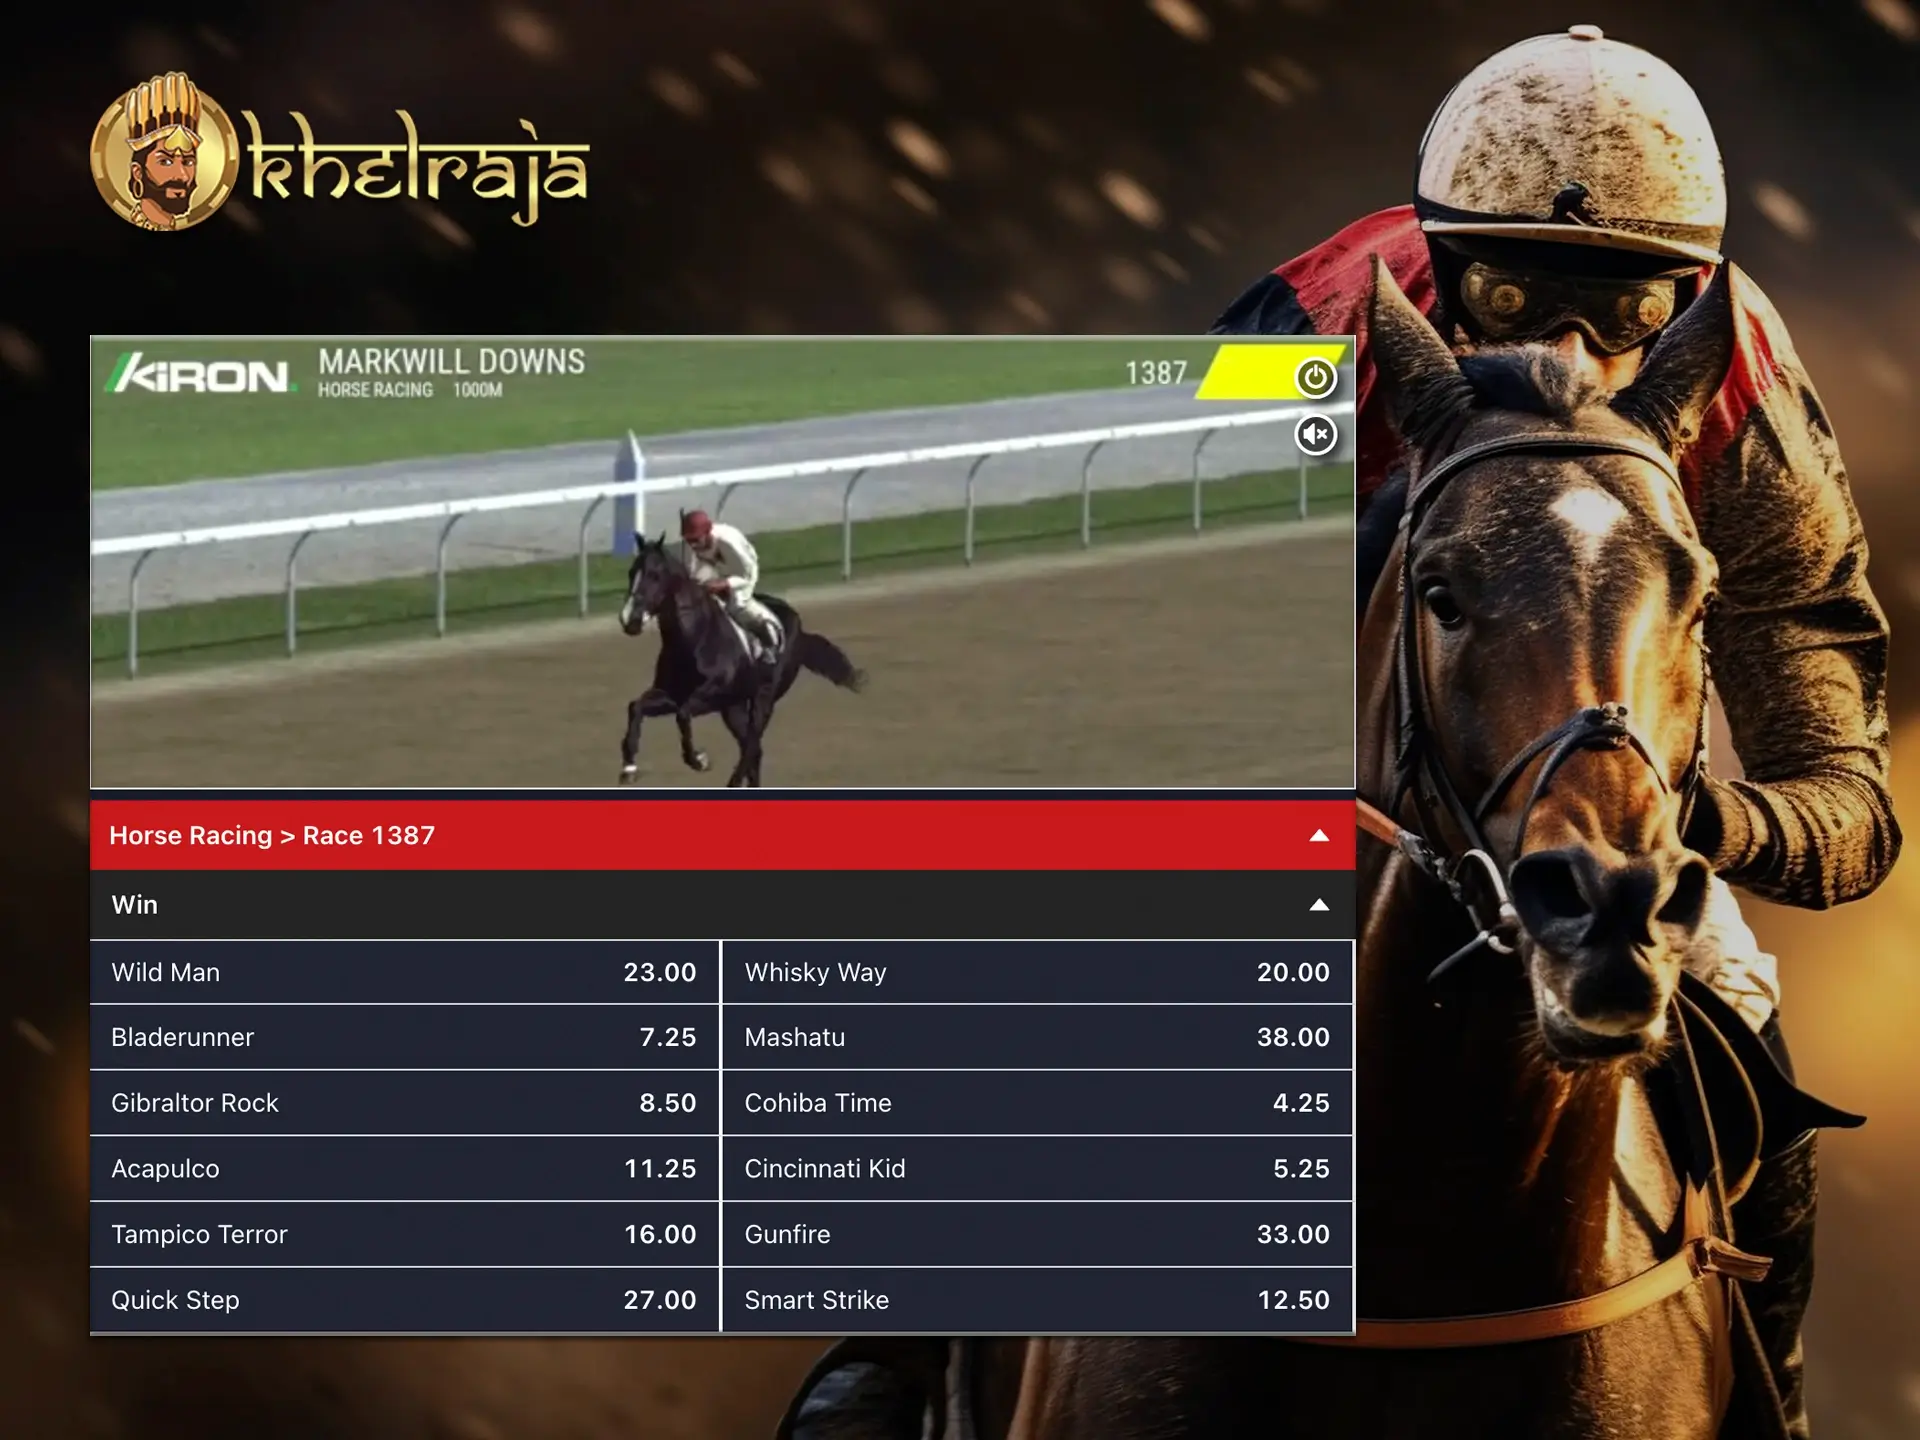 At the Khelraja website, you will find plenty of attractive odds for betting on horse racing.